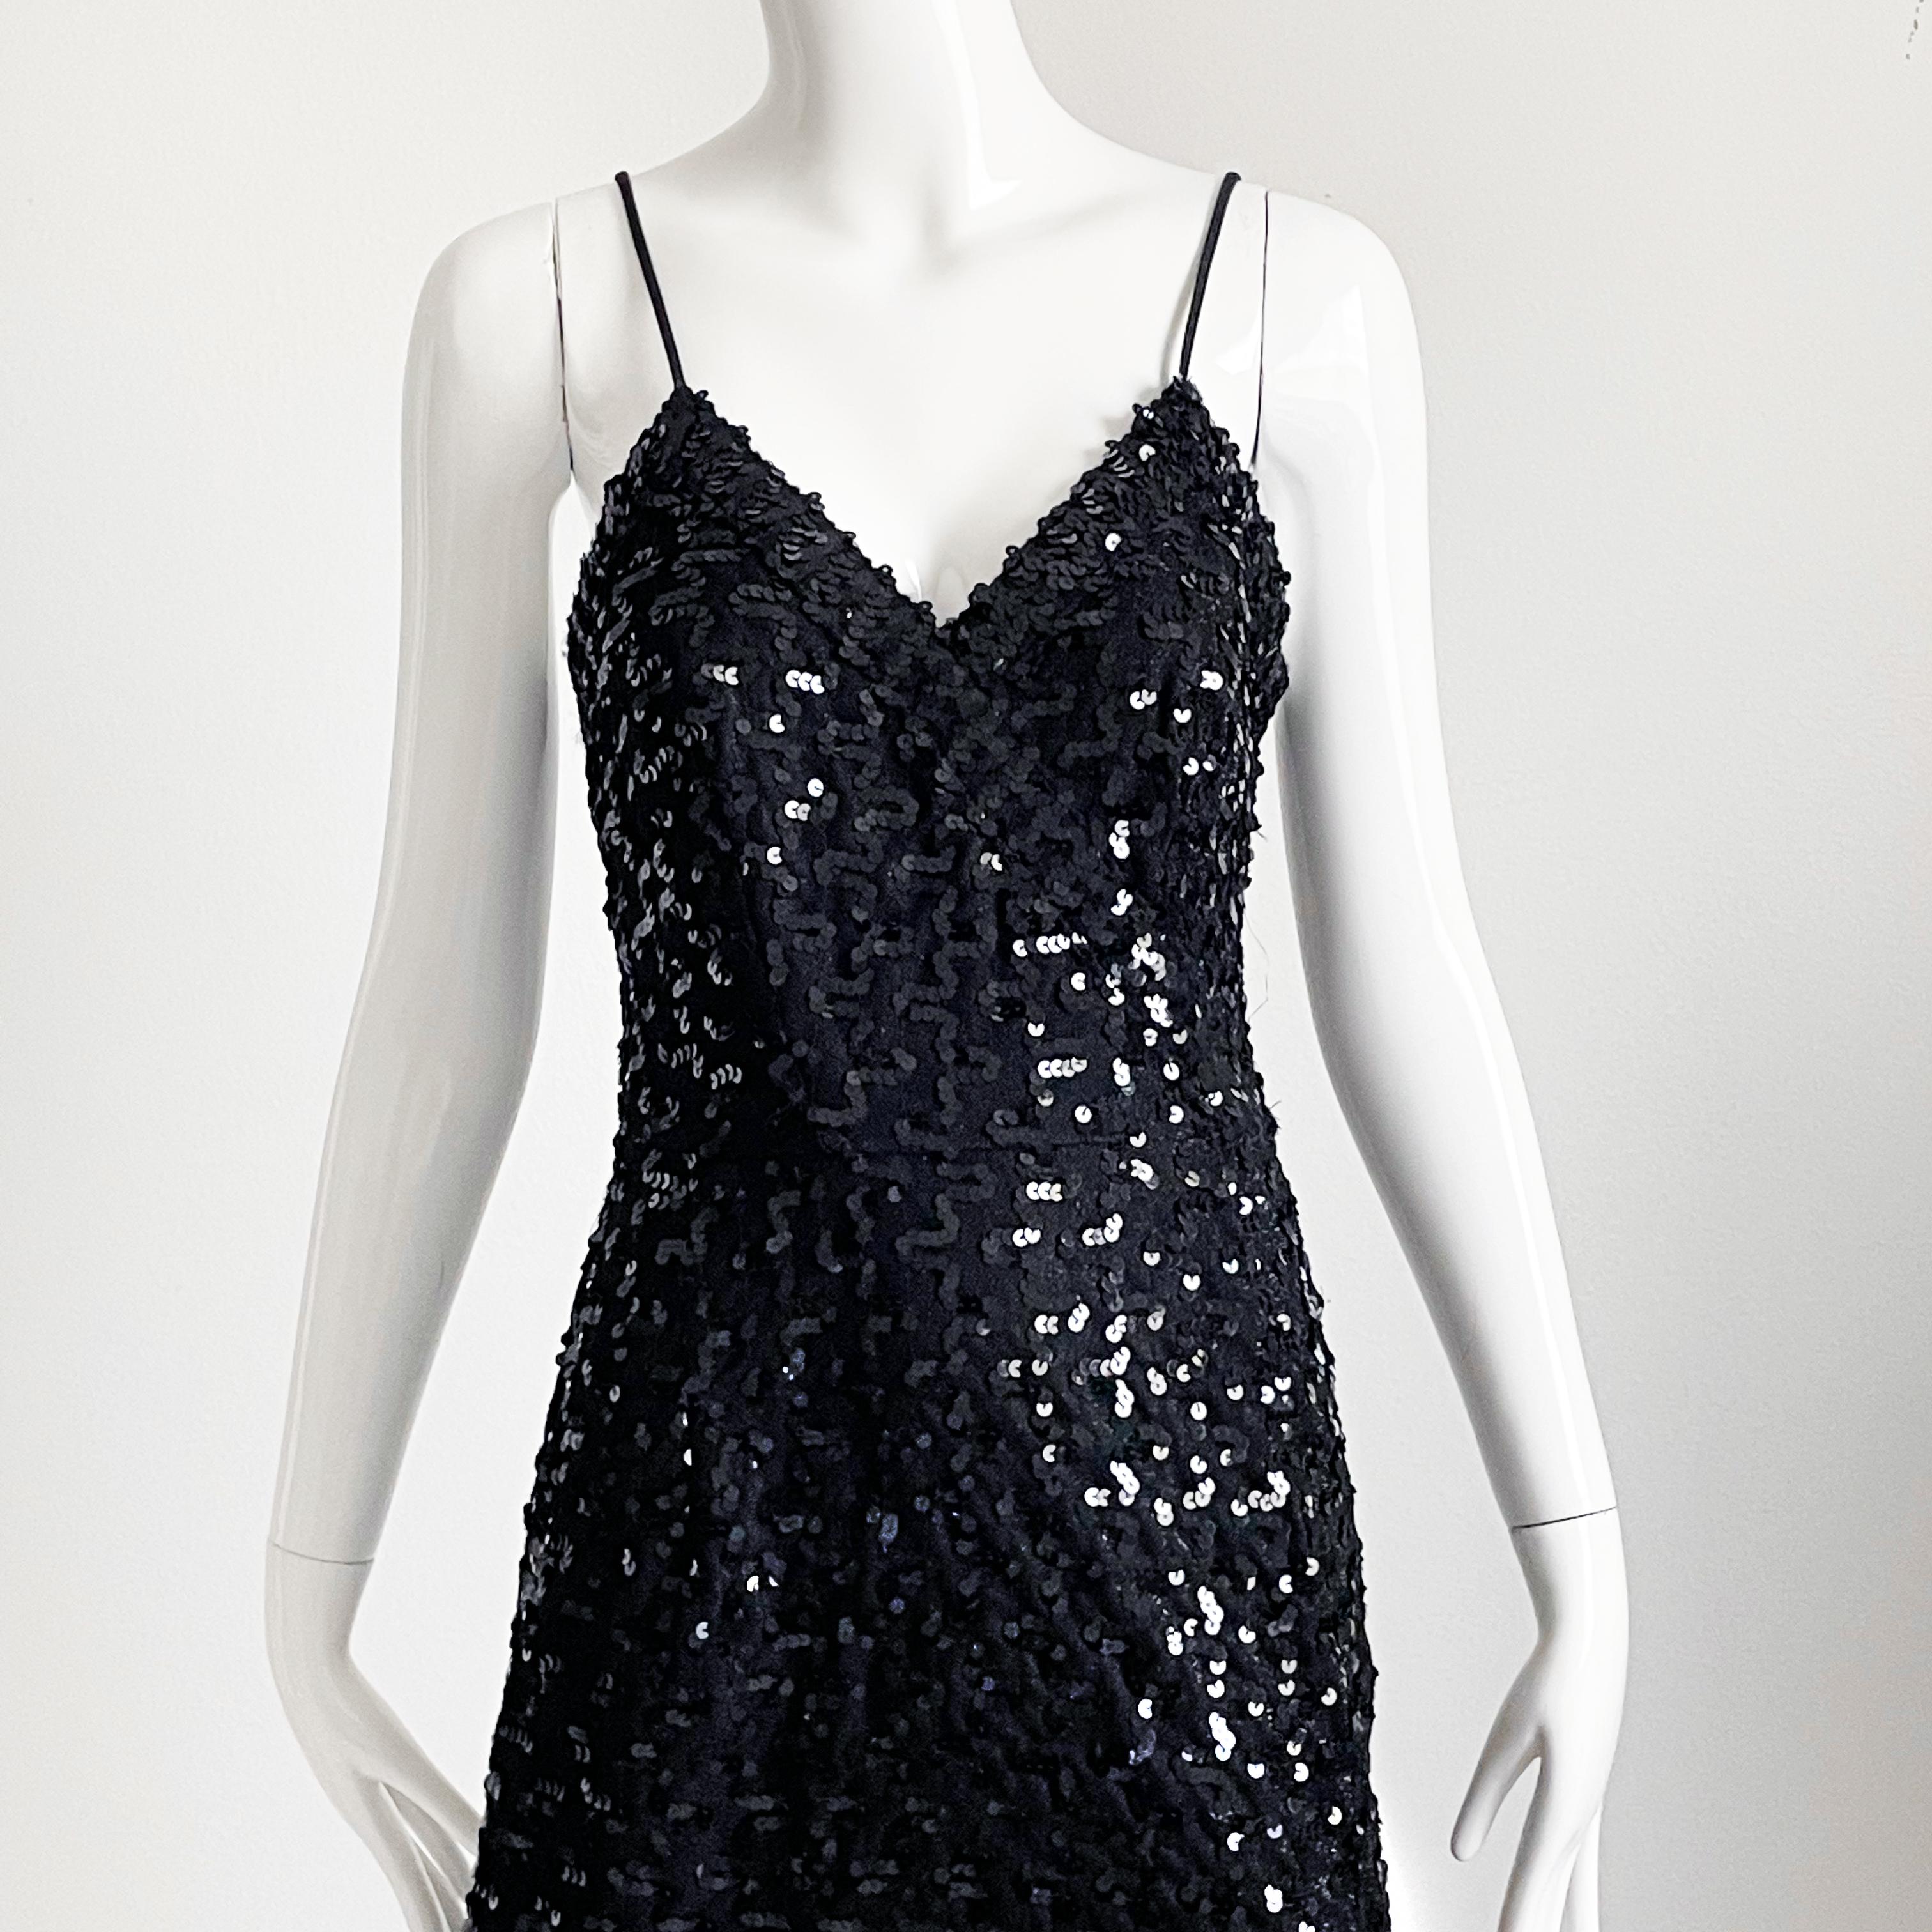 Lilli Diamond Evening Gown Sequins Sexy Black Knit Formal Dress Vintage 70s In Good Condition For Sale In Port Saint Lucie, FL